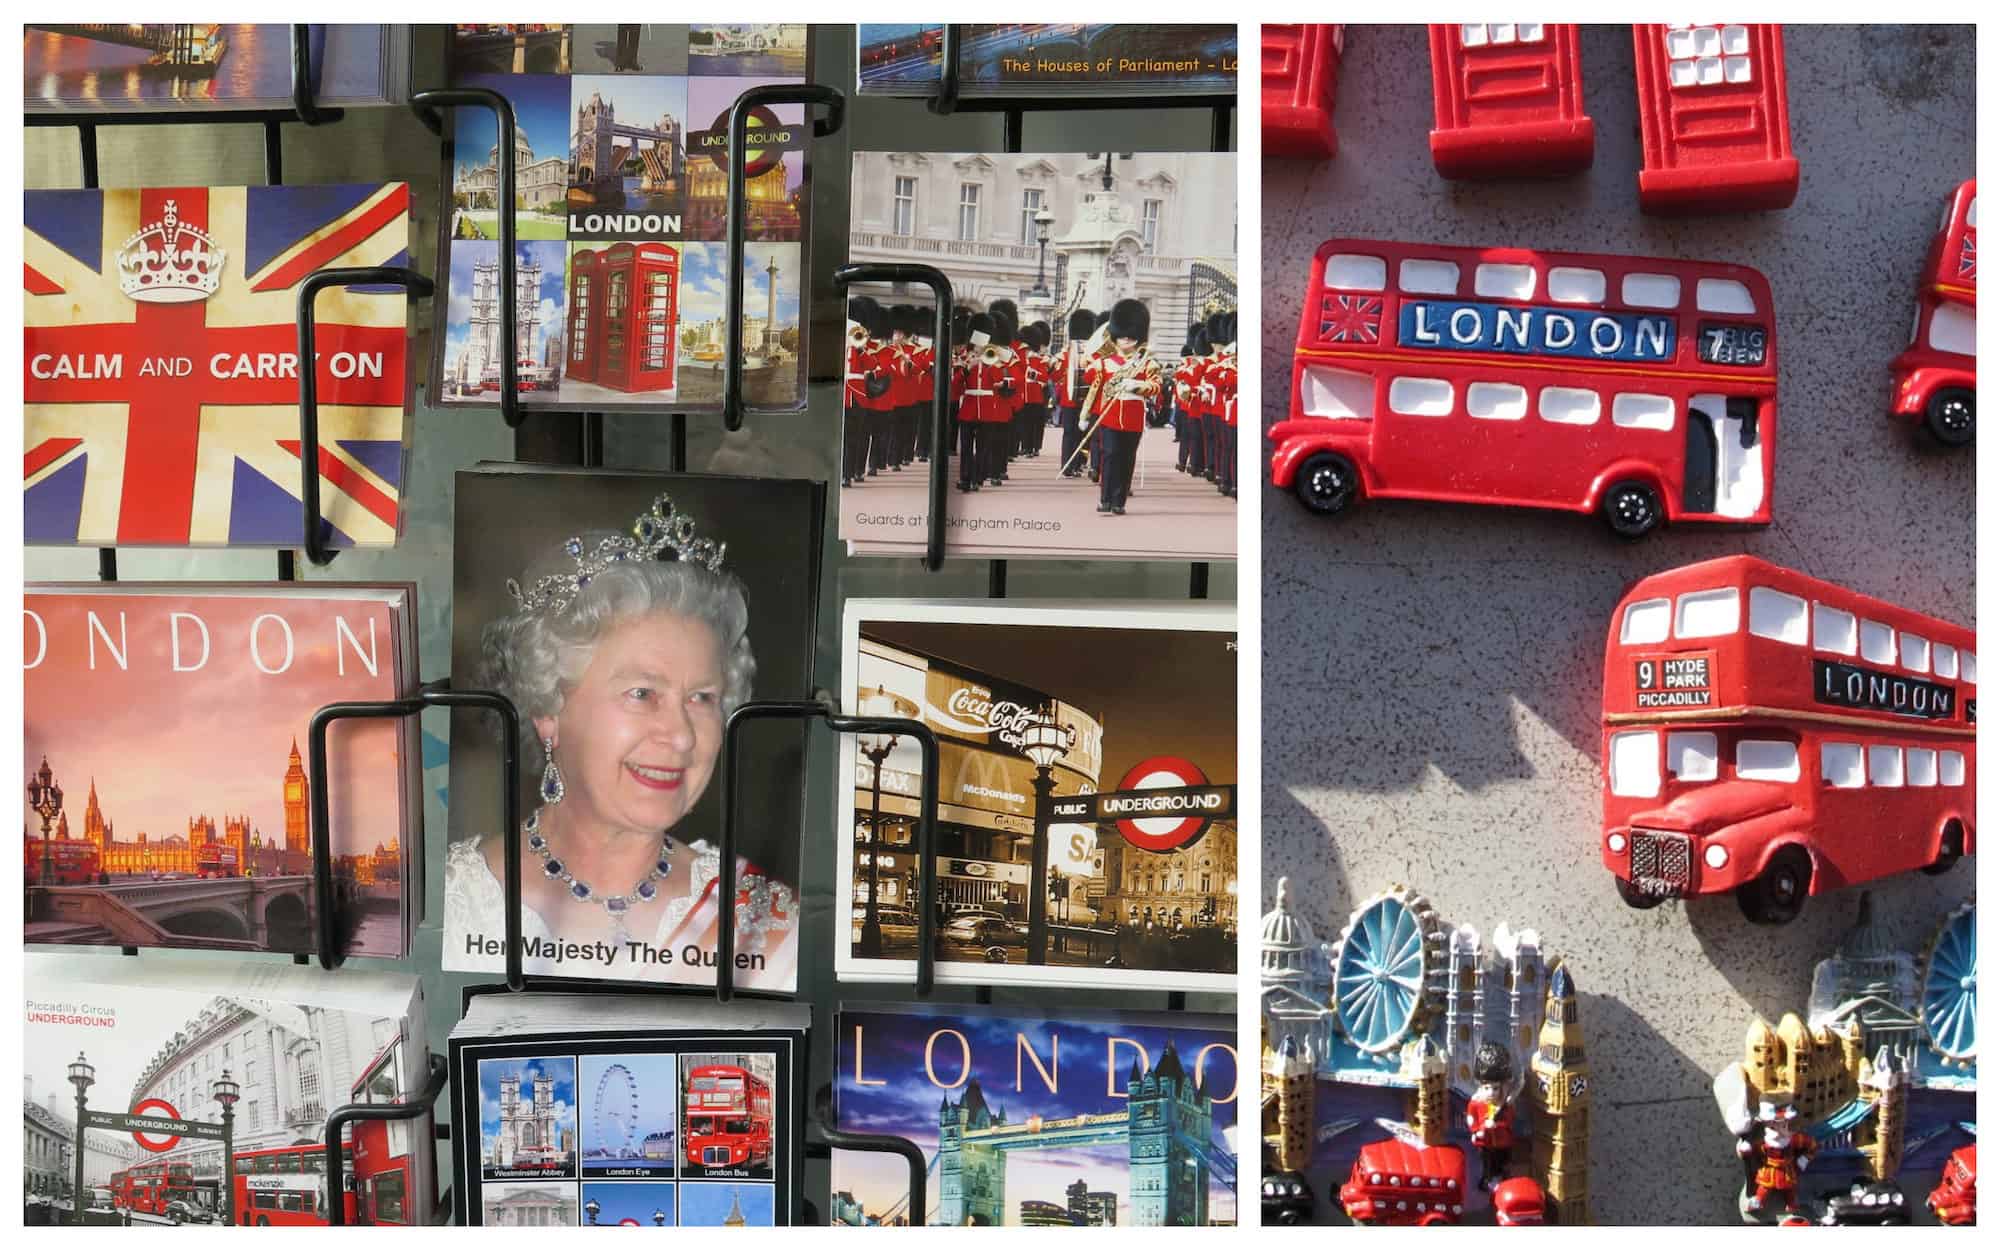 A London souvenir stall with postcards of the Royal Family and red double-decker bus magnets.